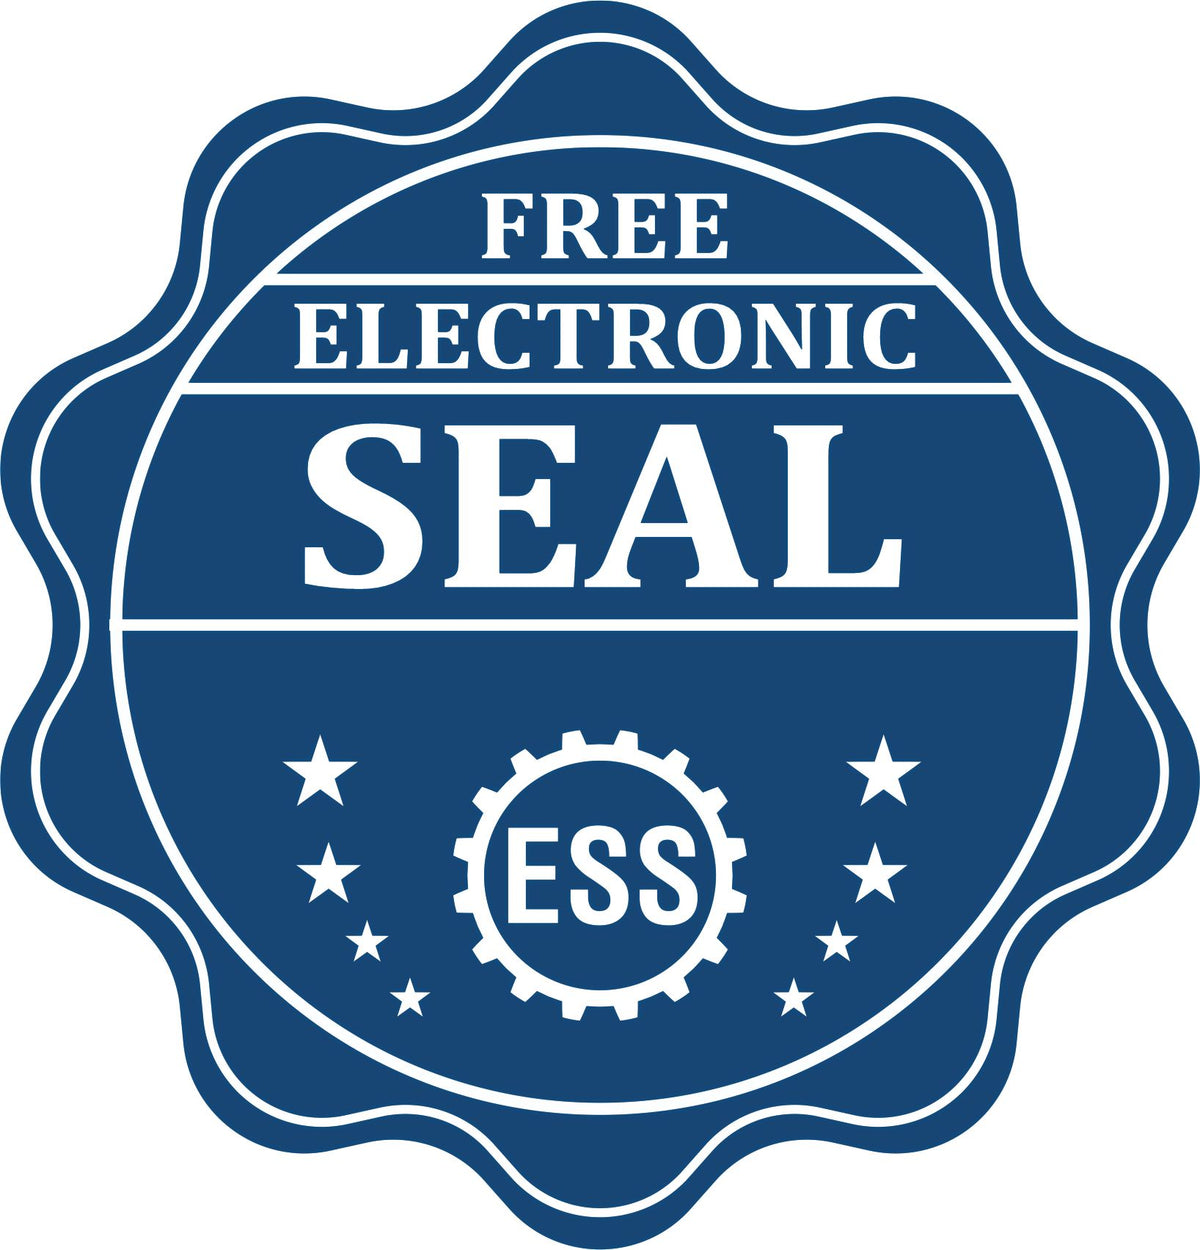 A badge showing a free electronic seal for the Heavy Duty Cast Iron Mississippi Land Surveyor Seal Embosser with stars and the ESS gear on the emblem.